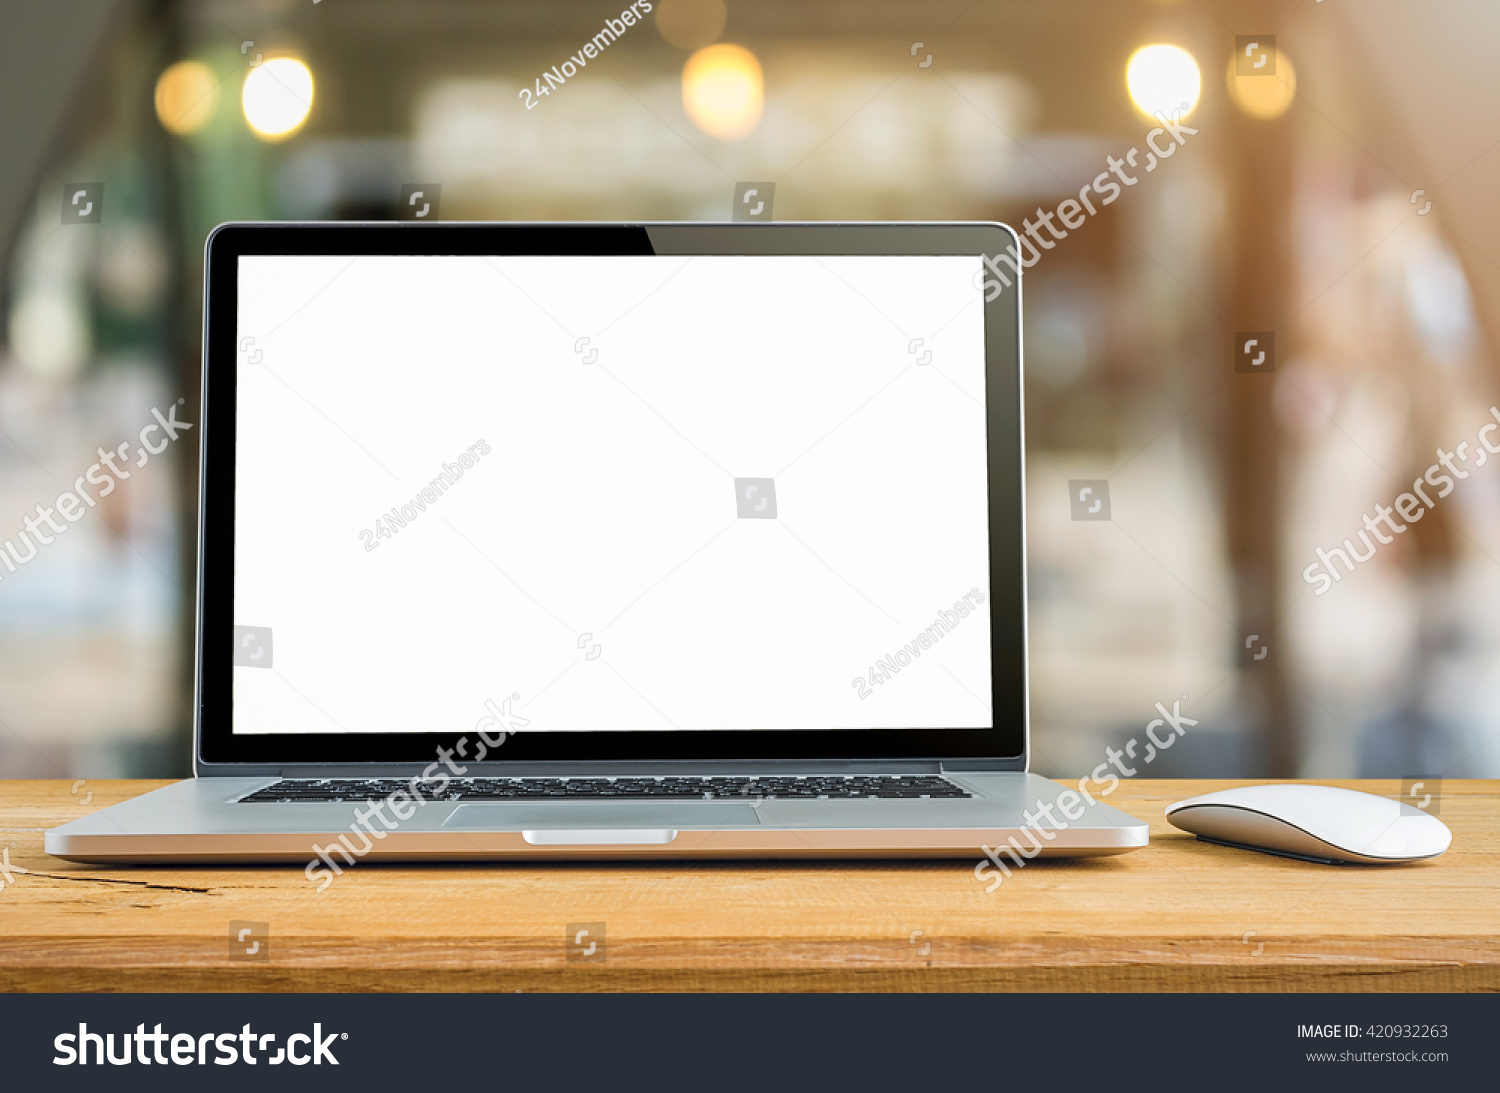 Conceptual workspace, Laptop computer with blank white screen on table, blurred background. #420932263